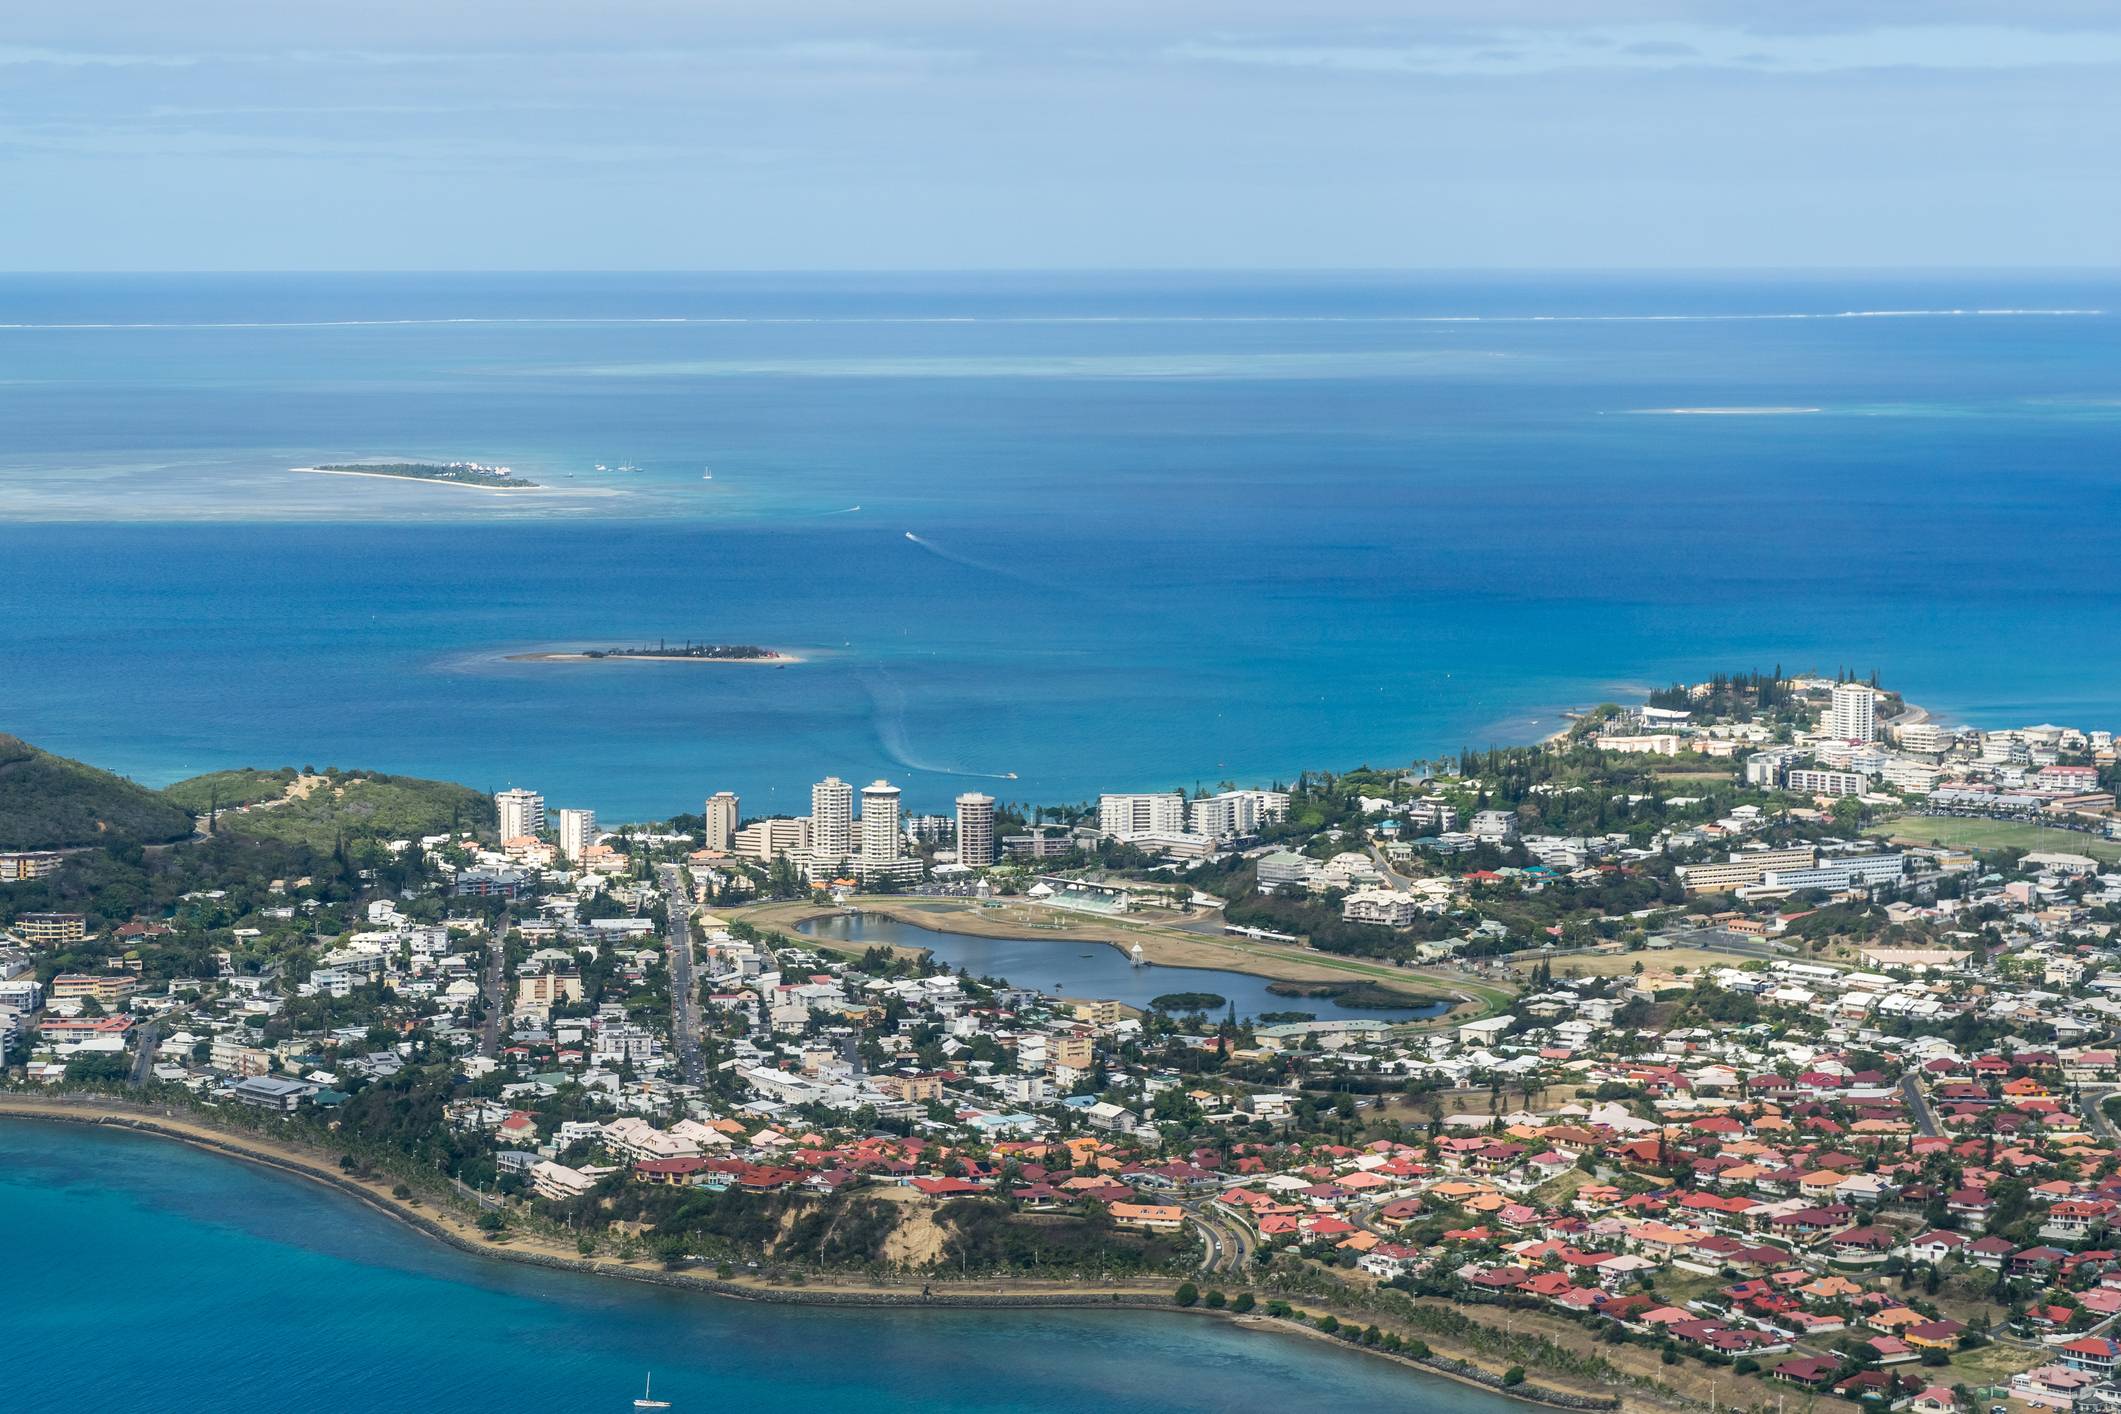 Noumea bay in New Caledonia. New Caledonia lifted its tsunami warning to citizens after a 7.7-magnitude earthquake struck on Friday in the Pacific Ocean southeast of the territory. | GETTY IMAGES